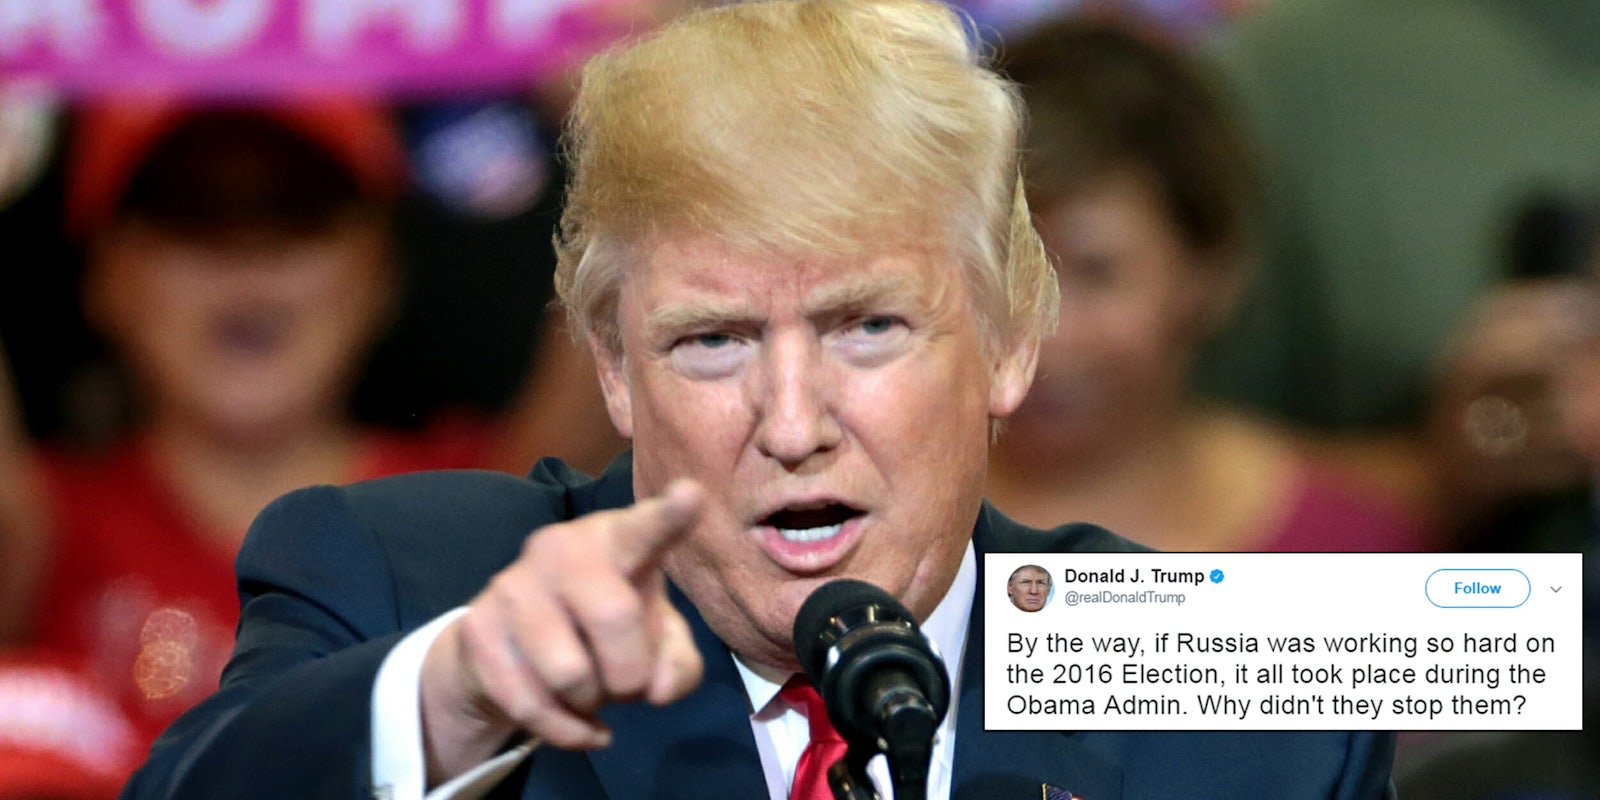 Donald Trump took to Twitter to talk about Obama and Russia